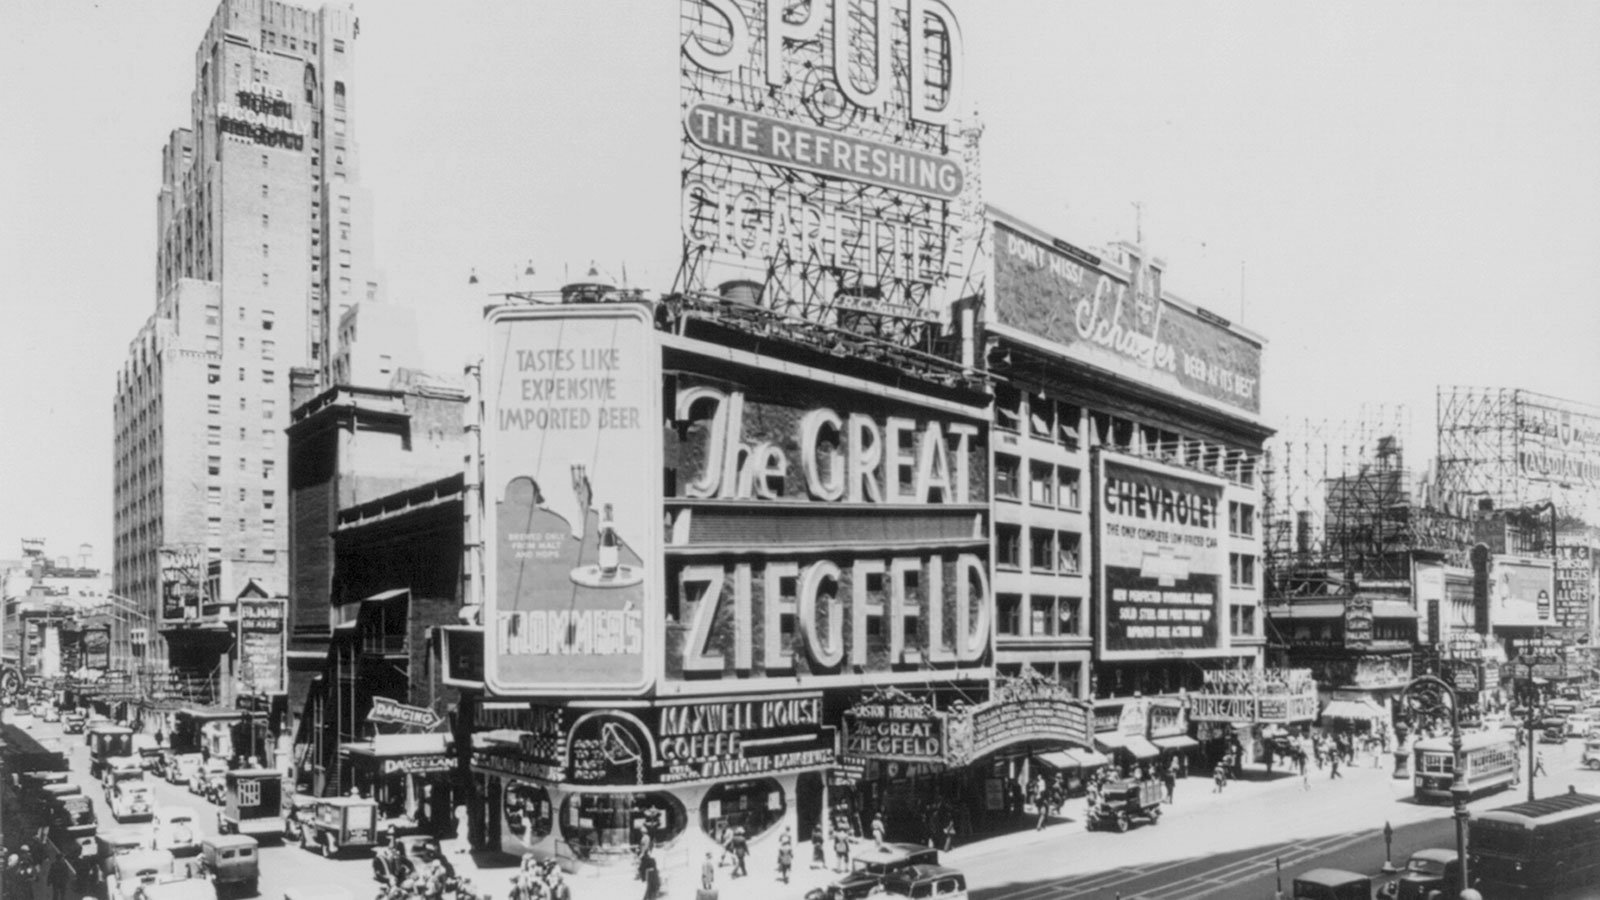 The Astor Theatre on Broadway and West 45th Street in New York City, circa 1936